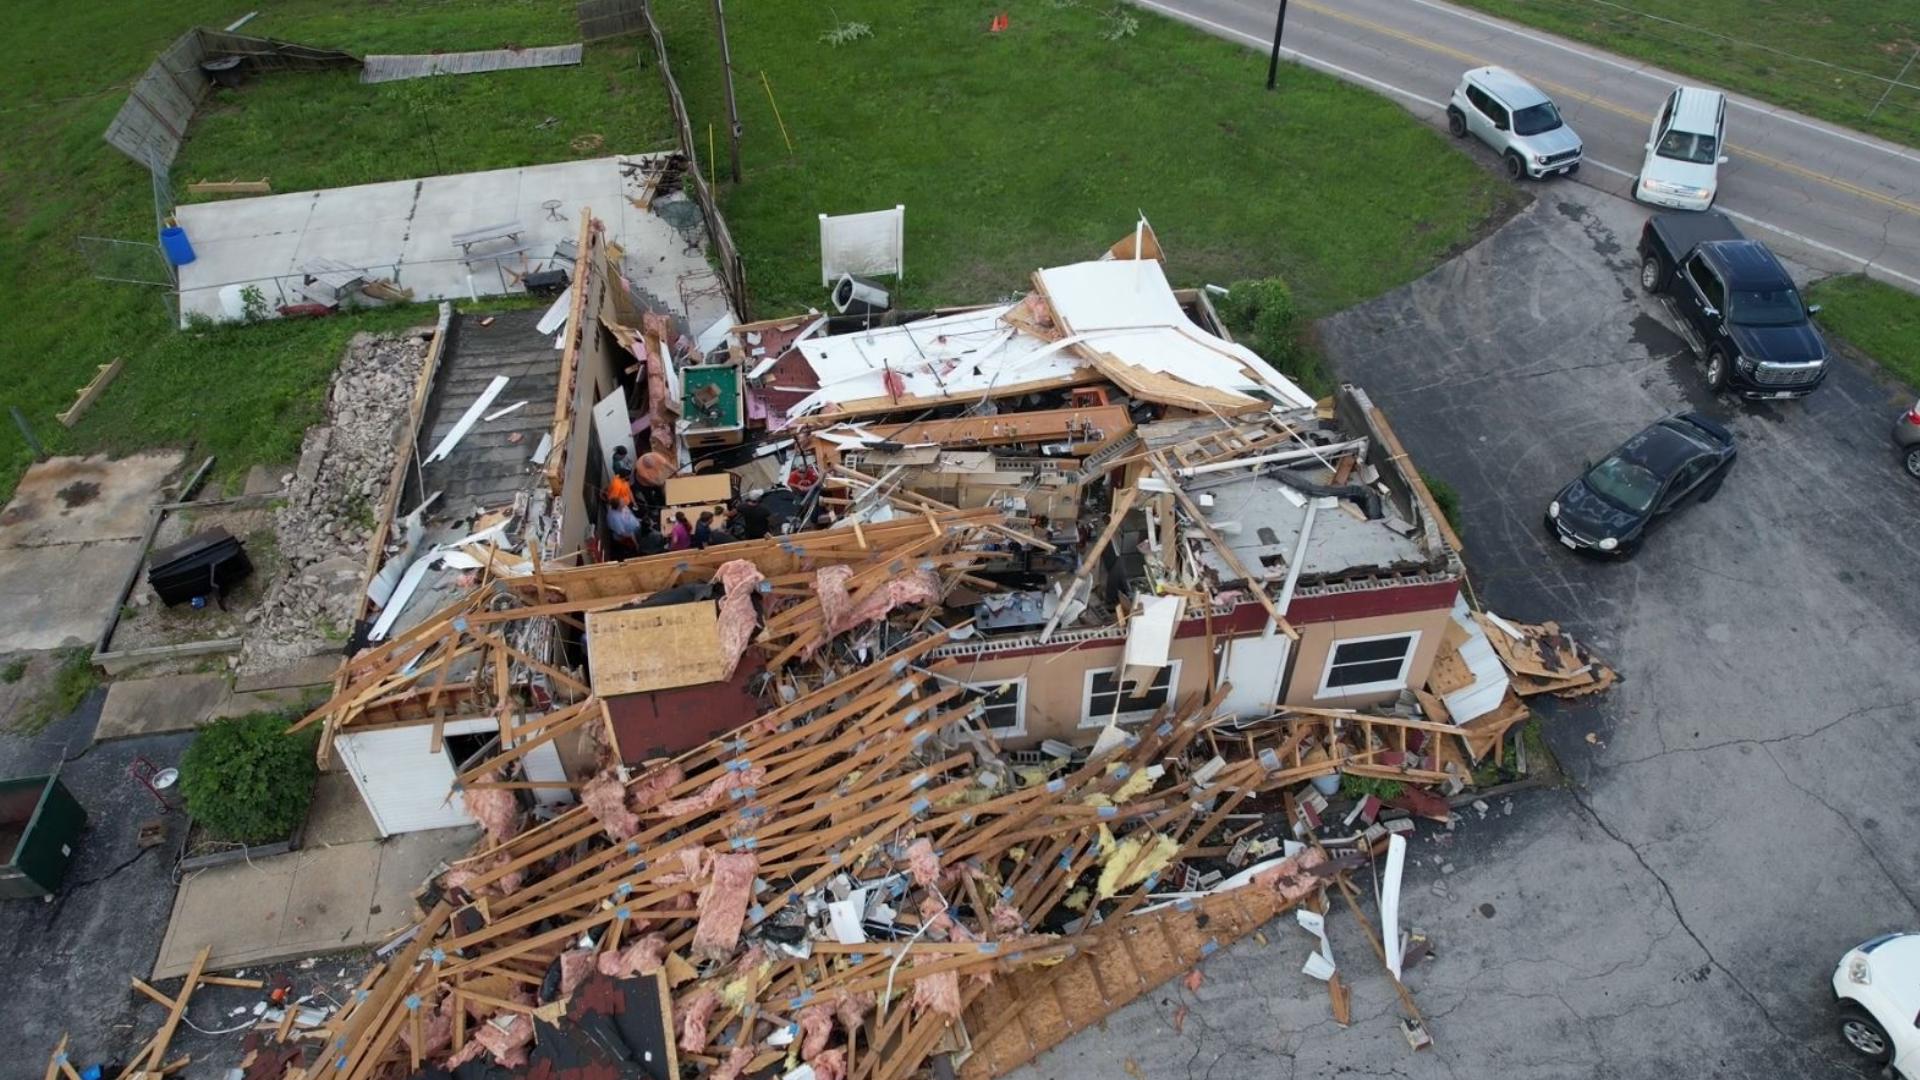 One More Pub & Grub was destroyed by a tornado during severe weather Tuesday morning. The storm struck the building at around 4 a.m.